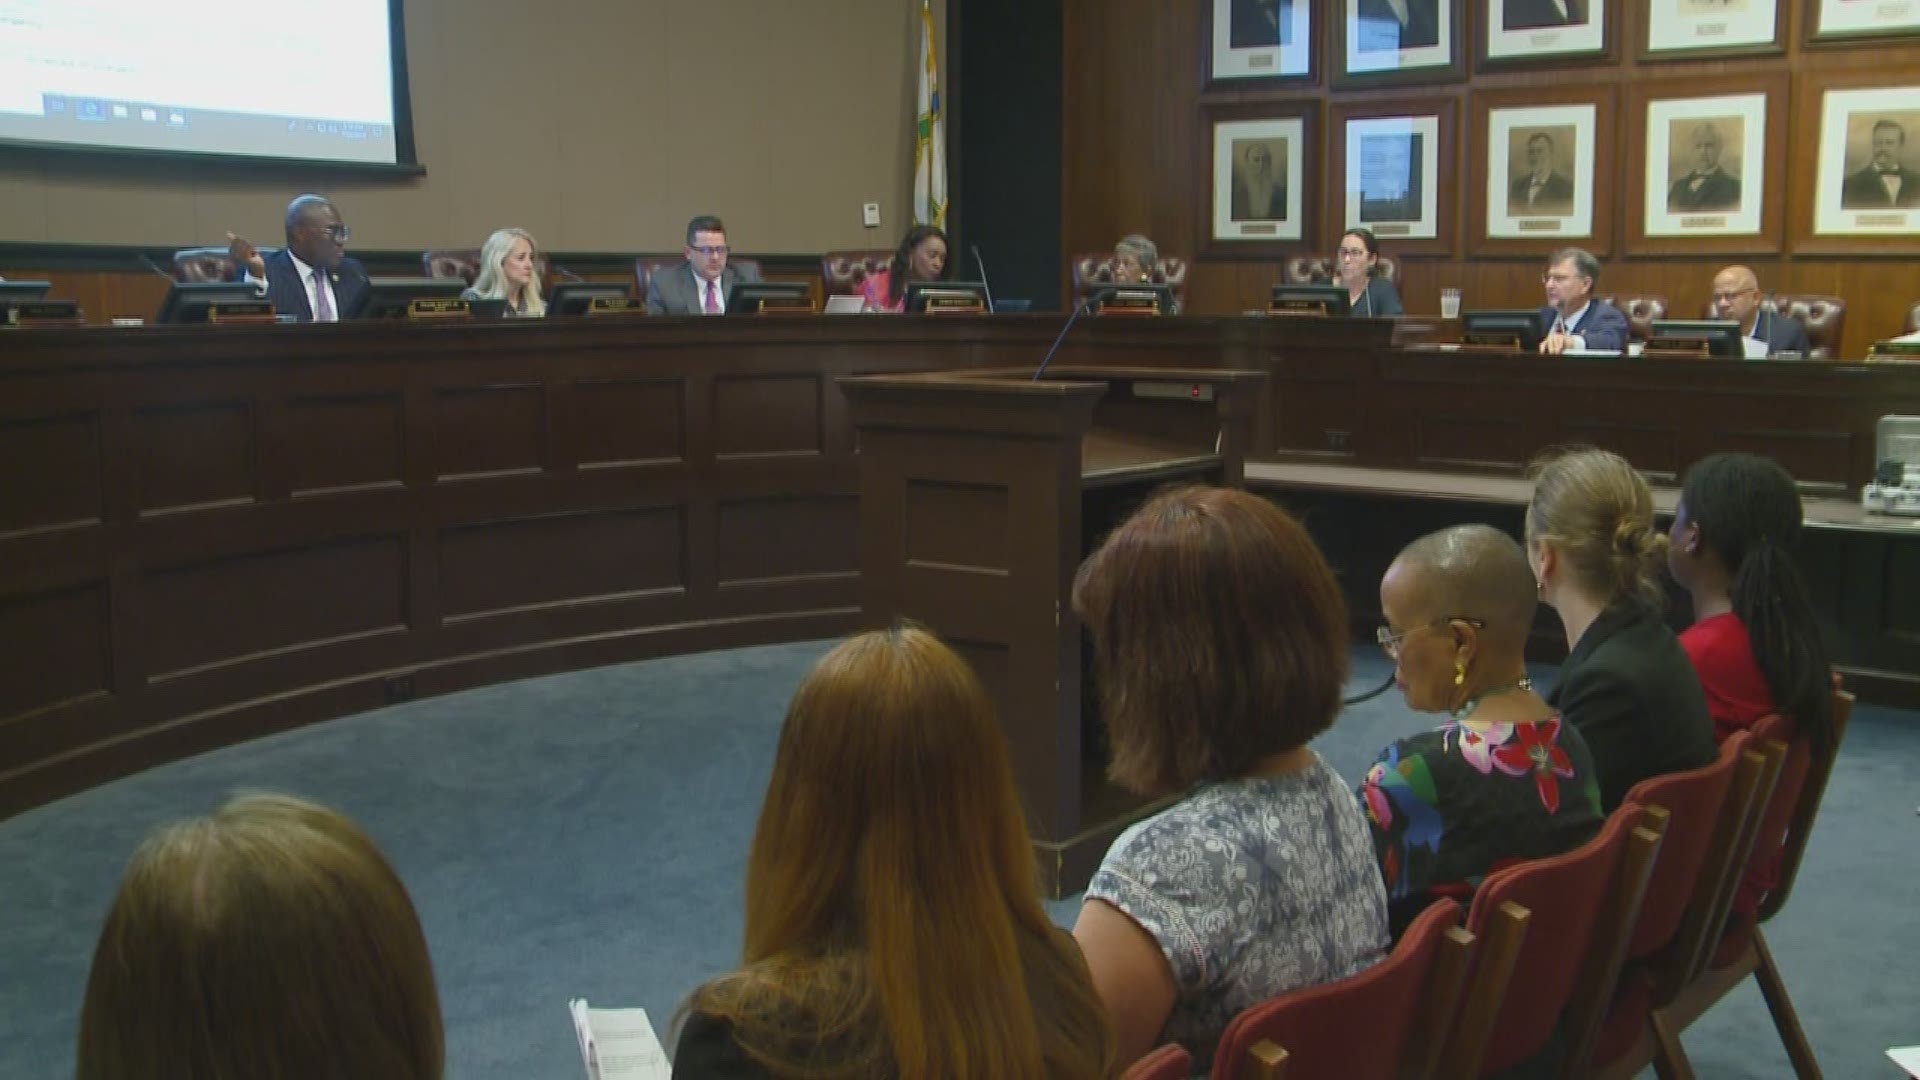 The Little Rock City Board meeting ended in decisions on issues we've been following closely.